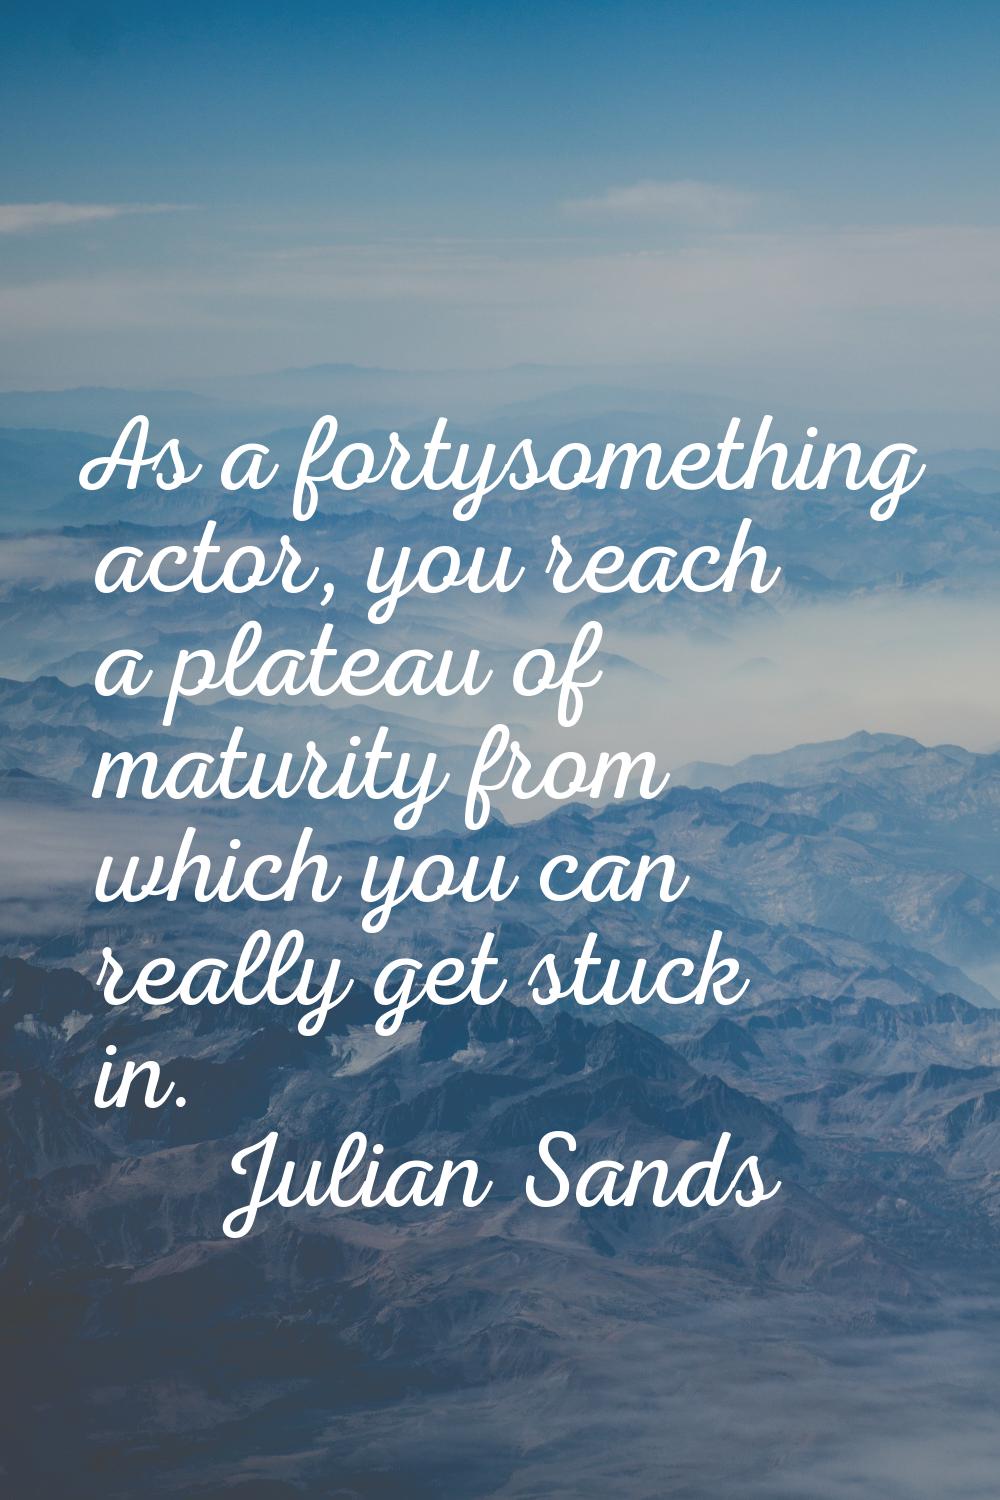 As a fortysomething actor, you reach a plateau of maturity from which you can really get stuck in.